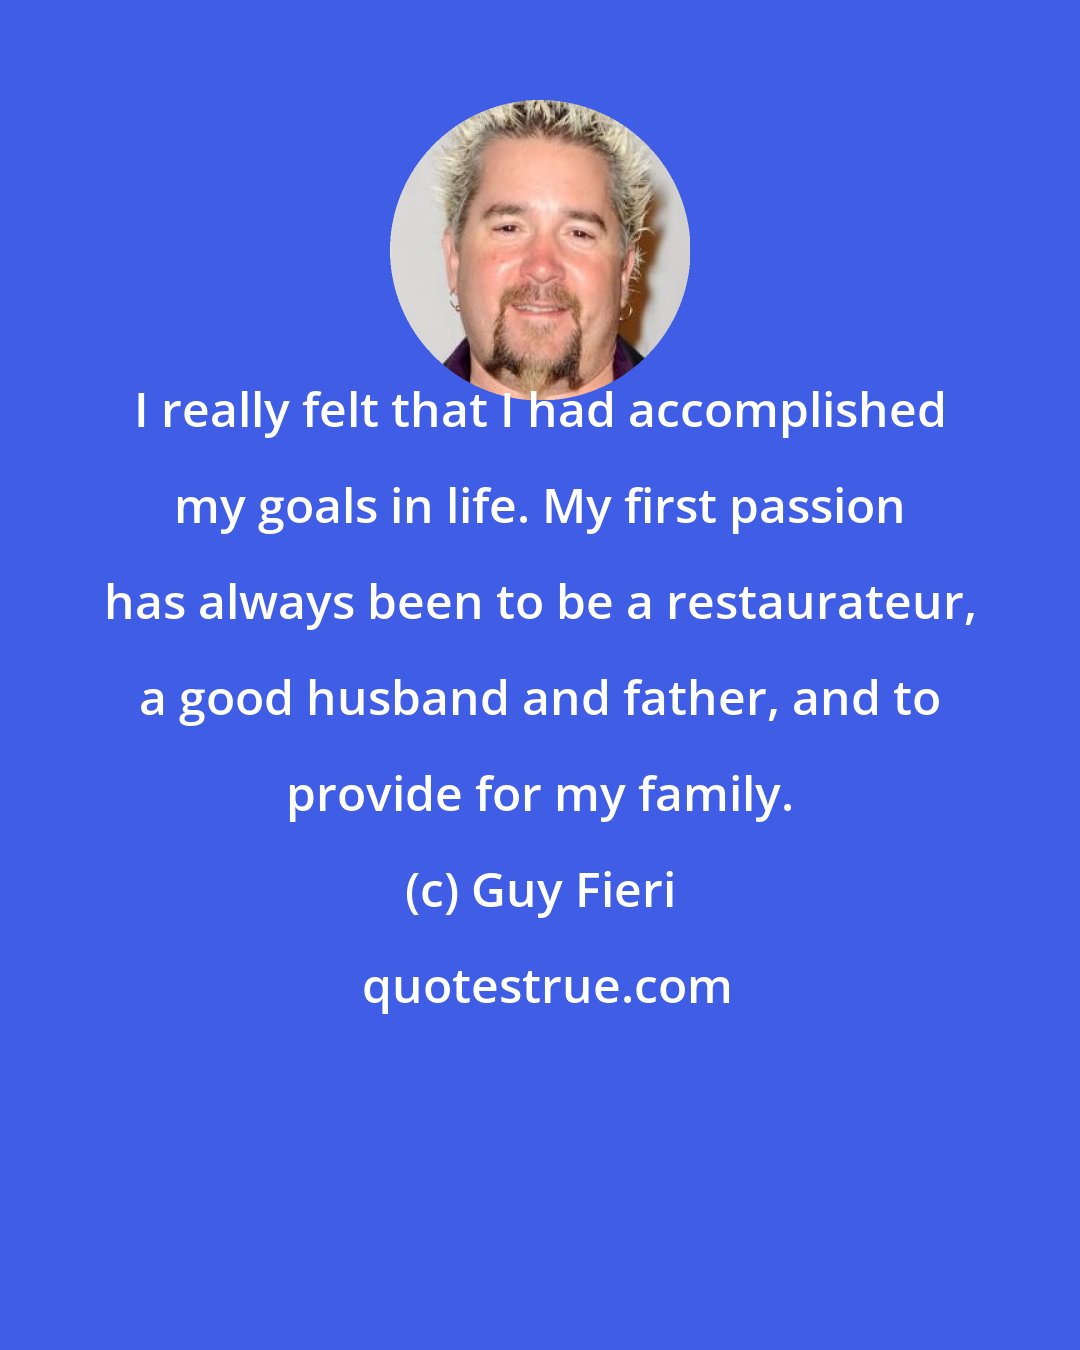 Guy Fieri: I really felt that I had accomplished my goals in life. My first passion has always been to be a restaurateur, a good husband and father, and to provide for my family.